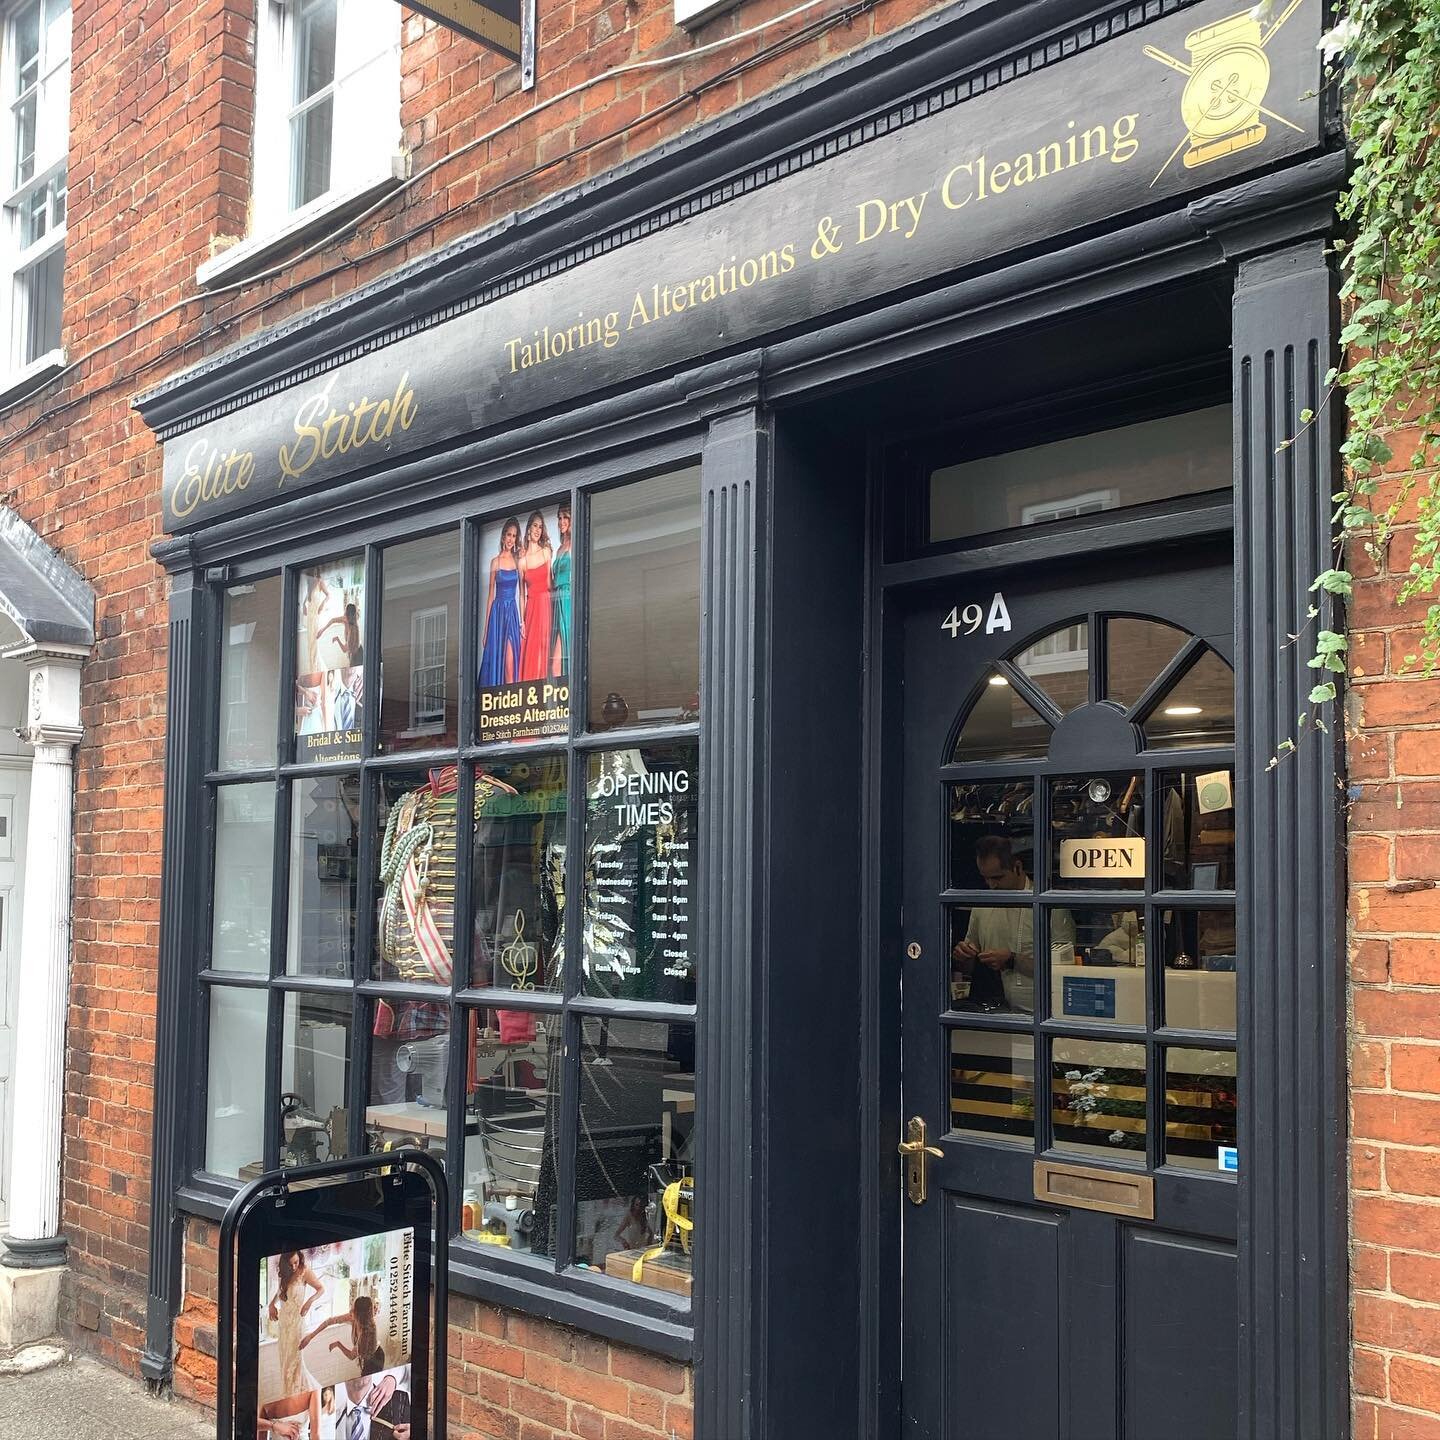 Yet another amazing, last minute, express alteration to my dtess by @elite.stitch in Farnham for a wedding today. THANK YOU! Highly recommend, as always! #elitestitch #tailors #alterations #localbusiness #supportlocalbusiness